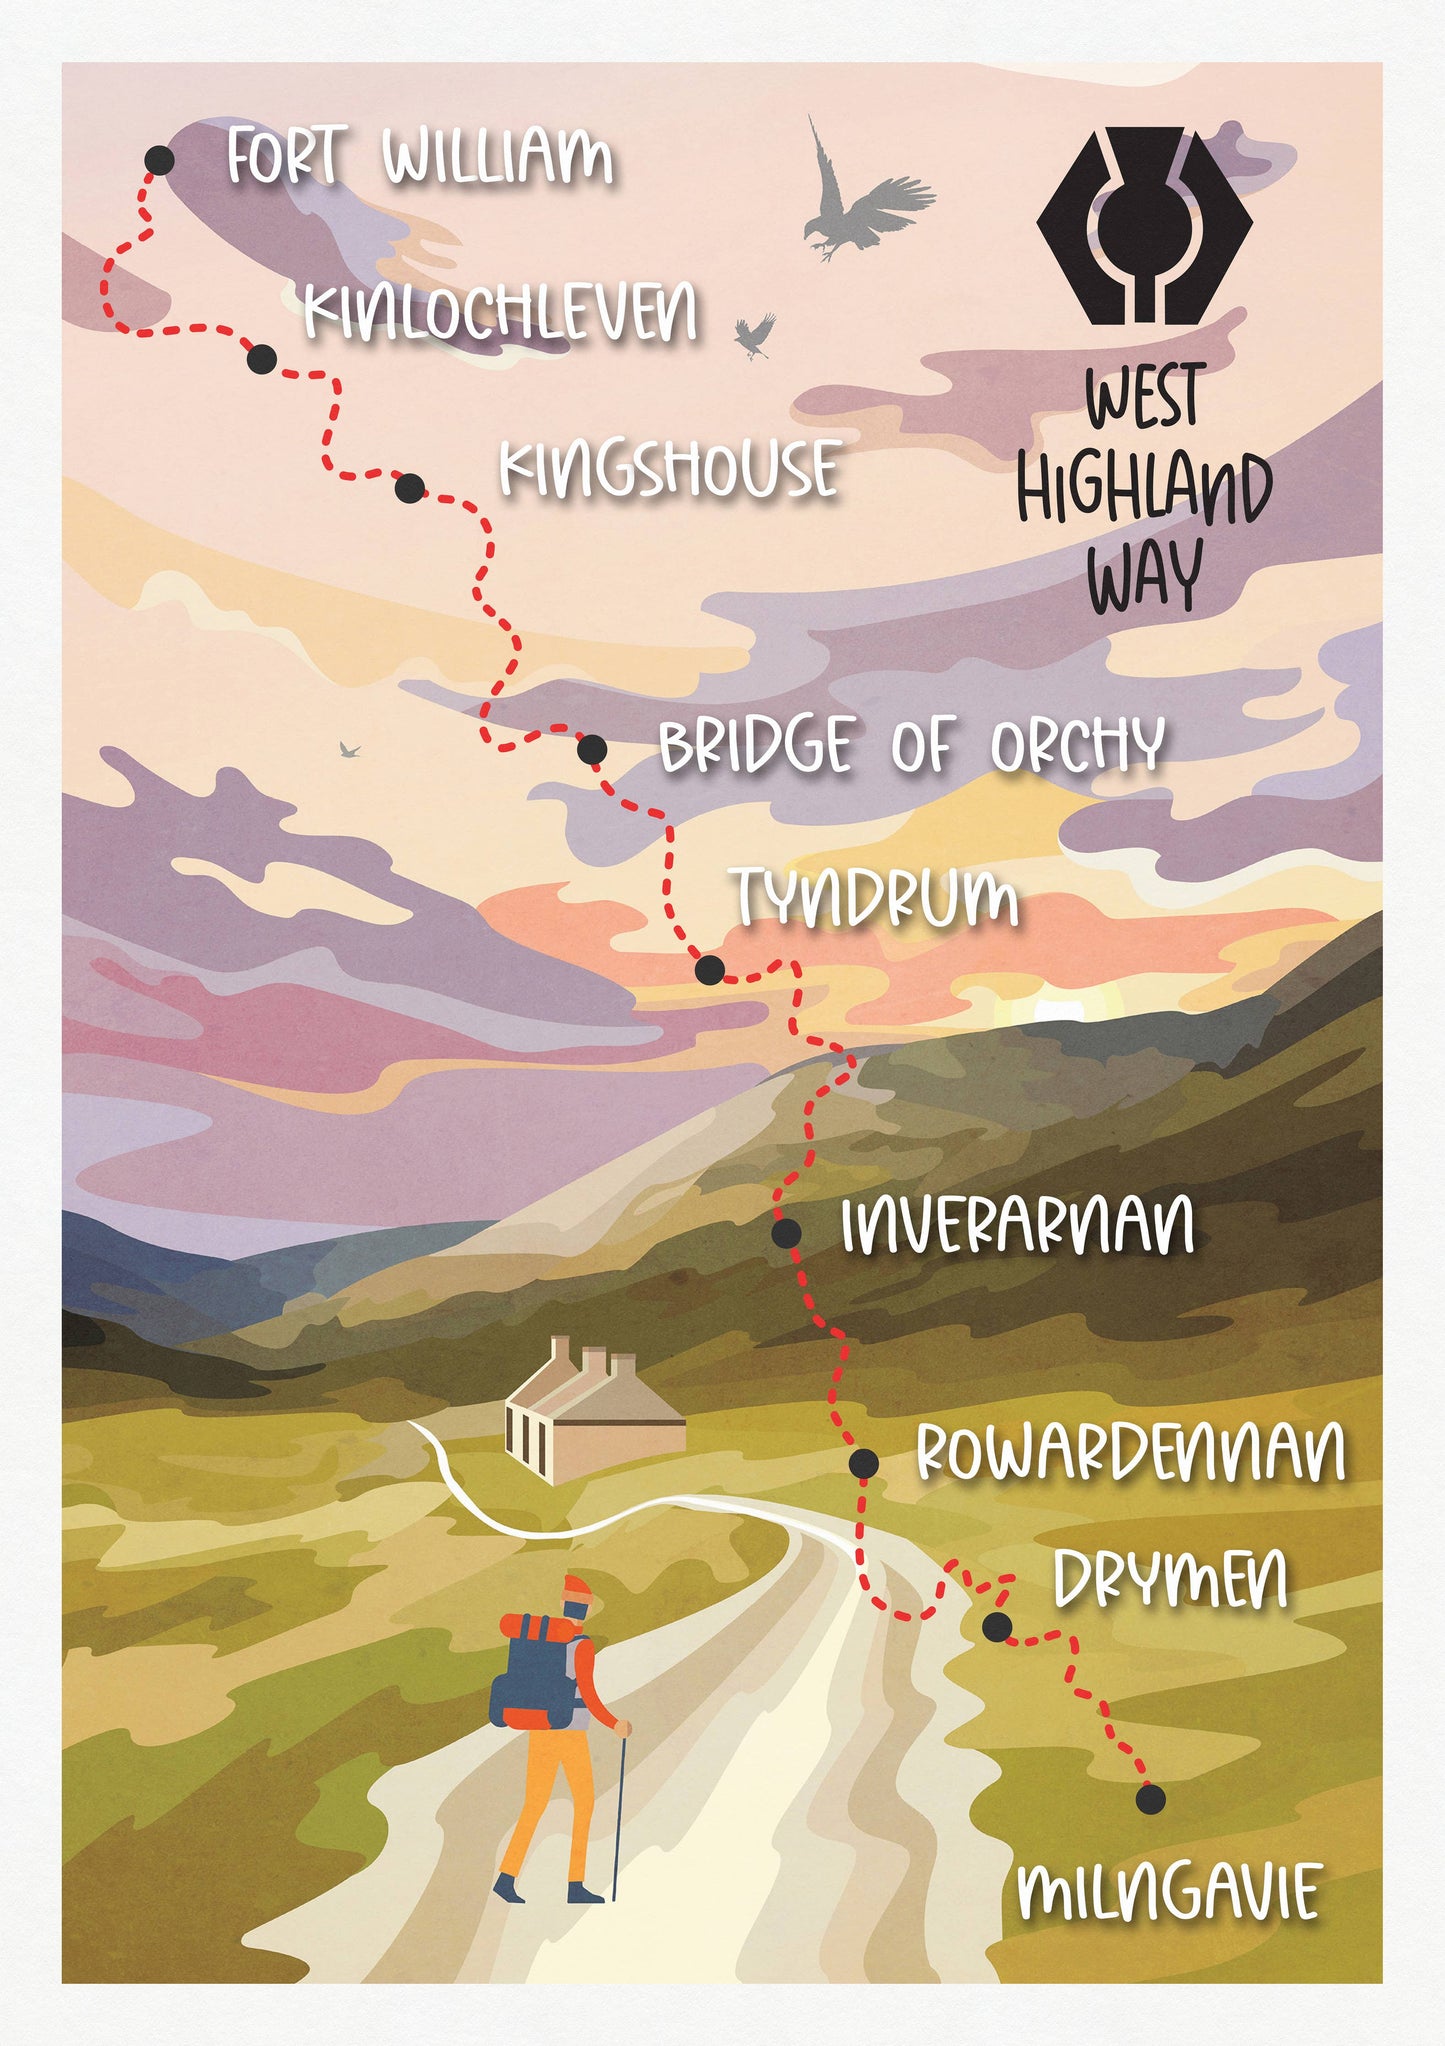 West Highland Way Route Map - Illustrated Trail Print